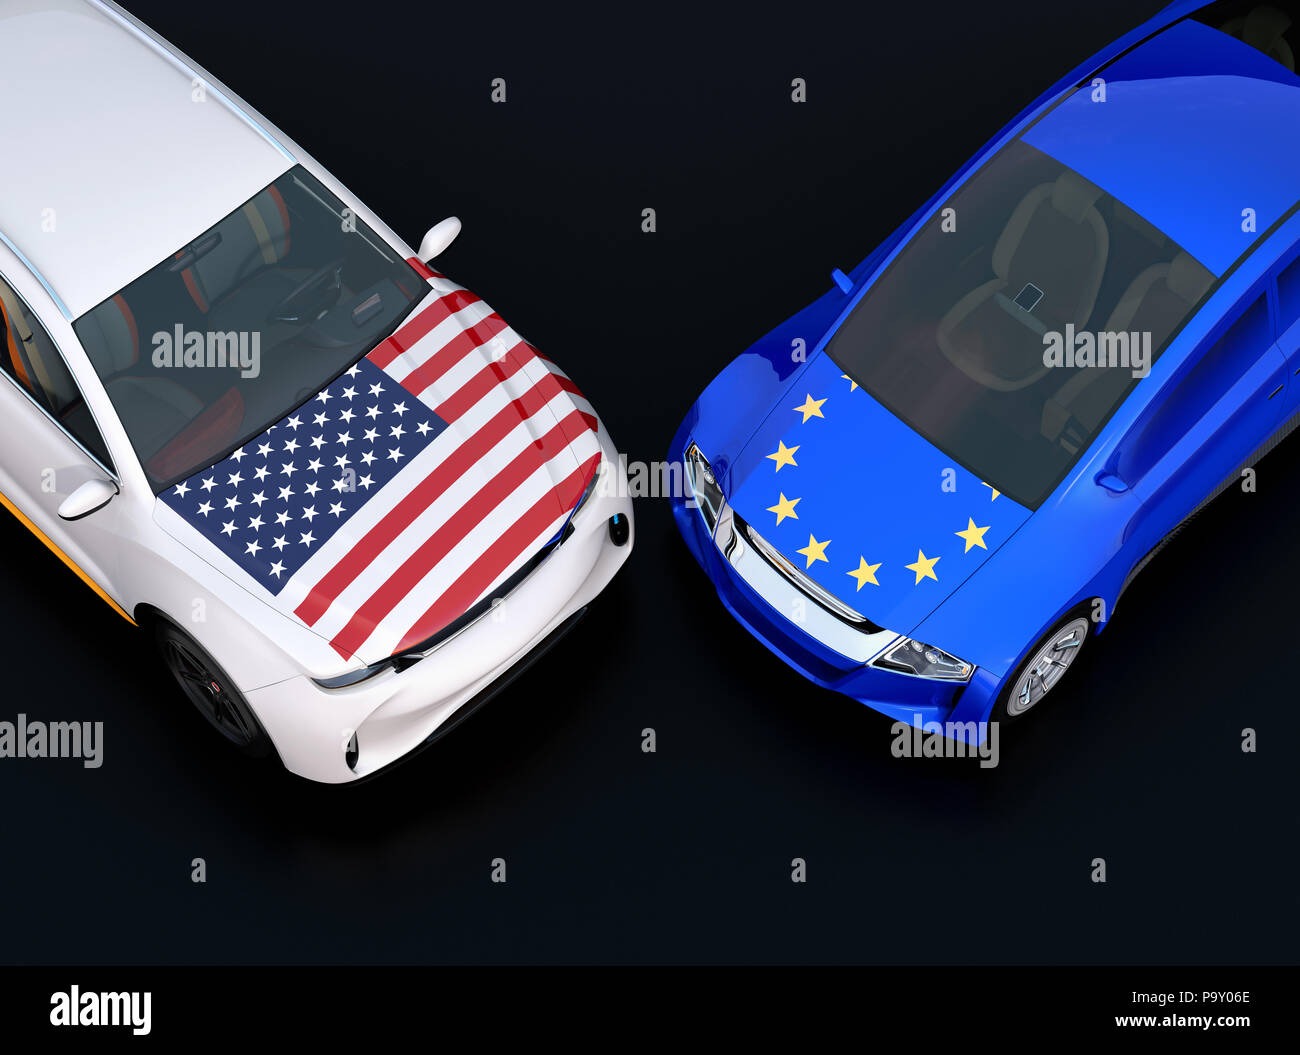 EU and US flags on two automobiles hood. black background. Europe USA trade war, American tariffs concept. 3D rendering image. Stock Photo